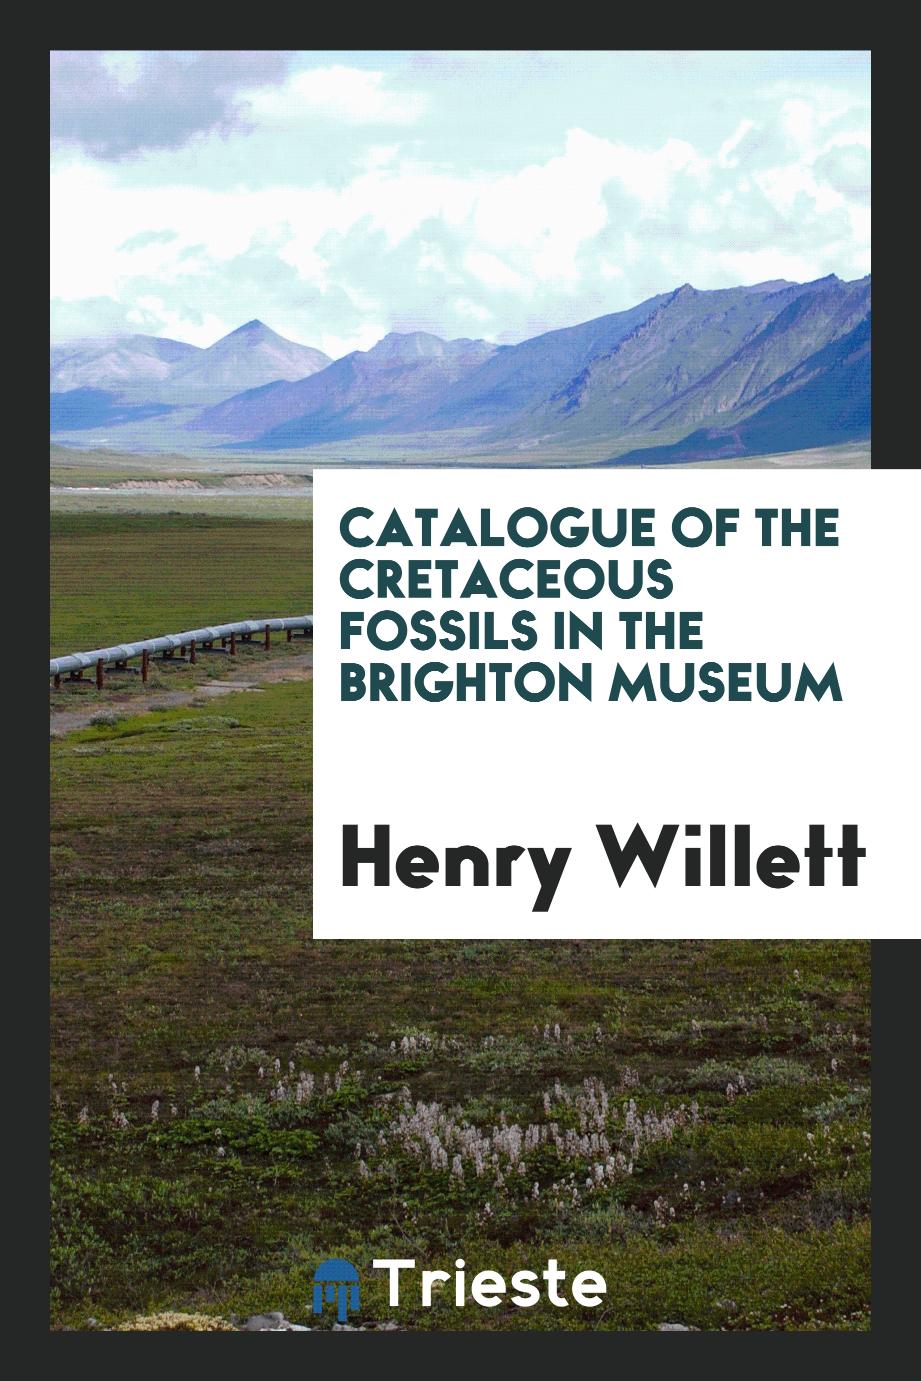 Catalogue of the Cretaceous fossils in the Brighton museum